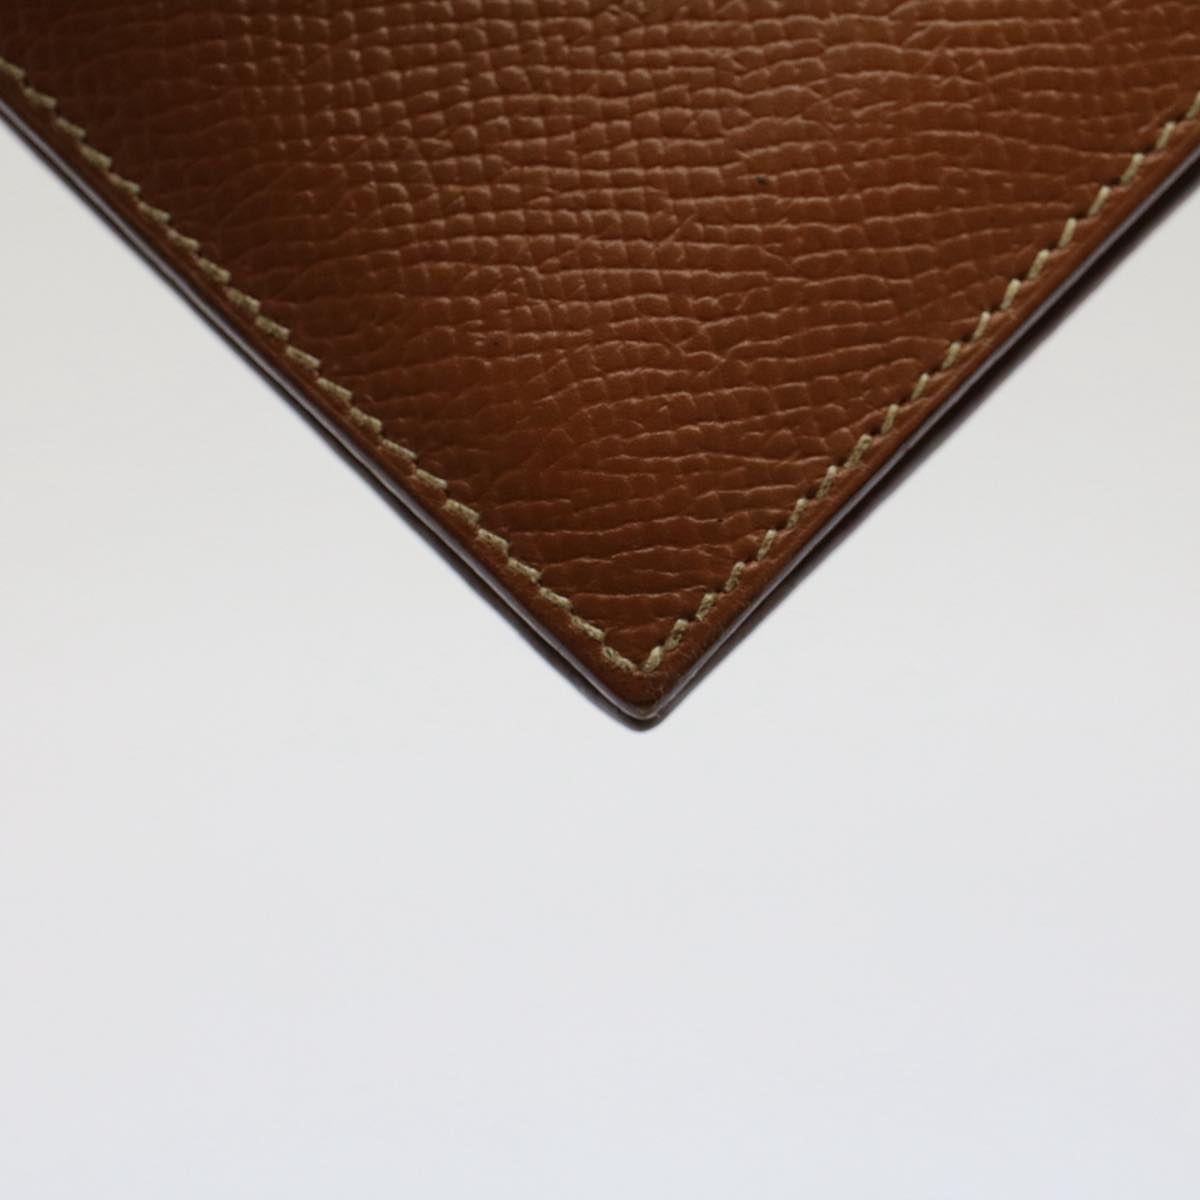 HERMES Ajanda Vijo Day Planner Cover Leather Brown Auth ac2153